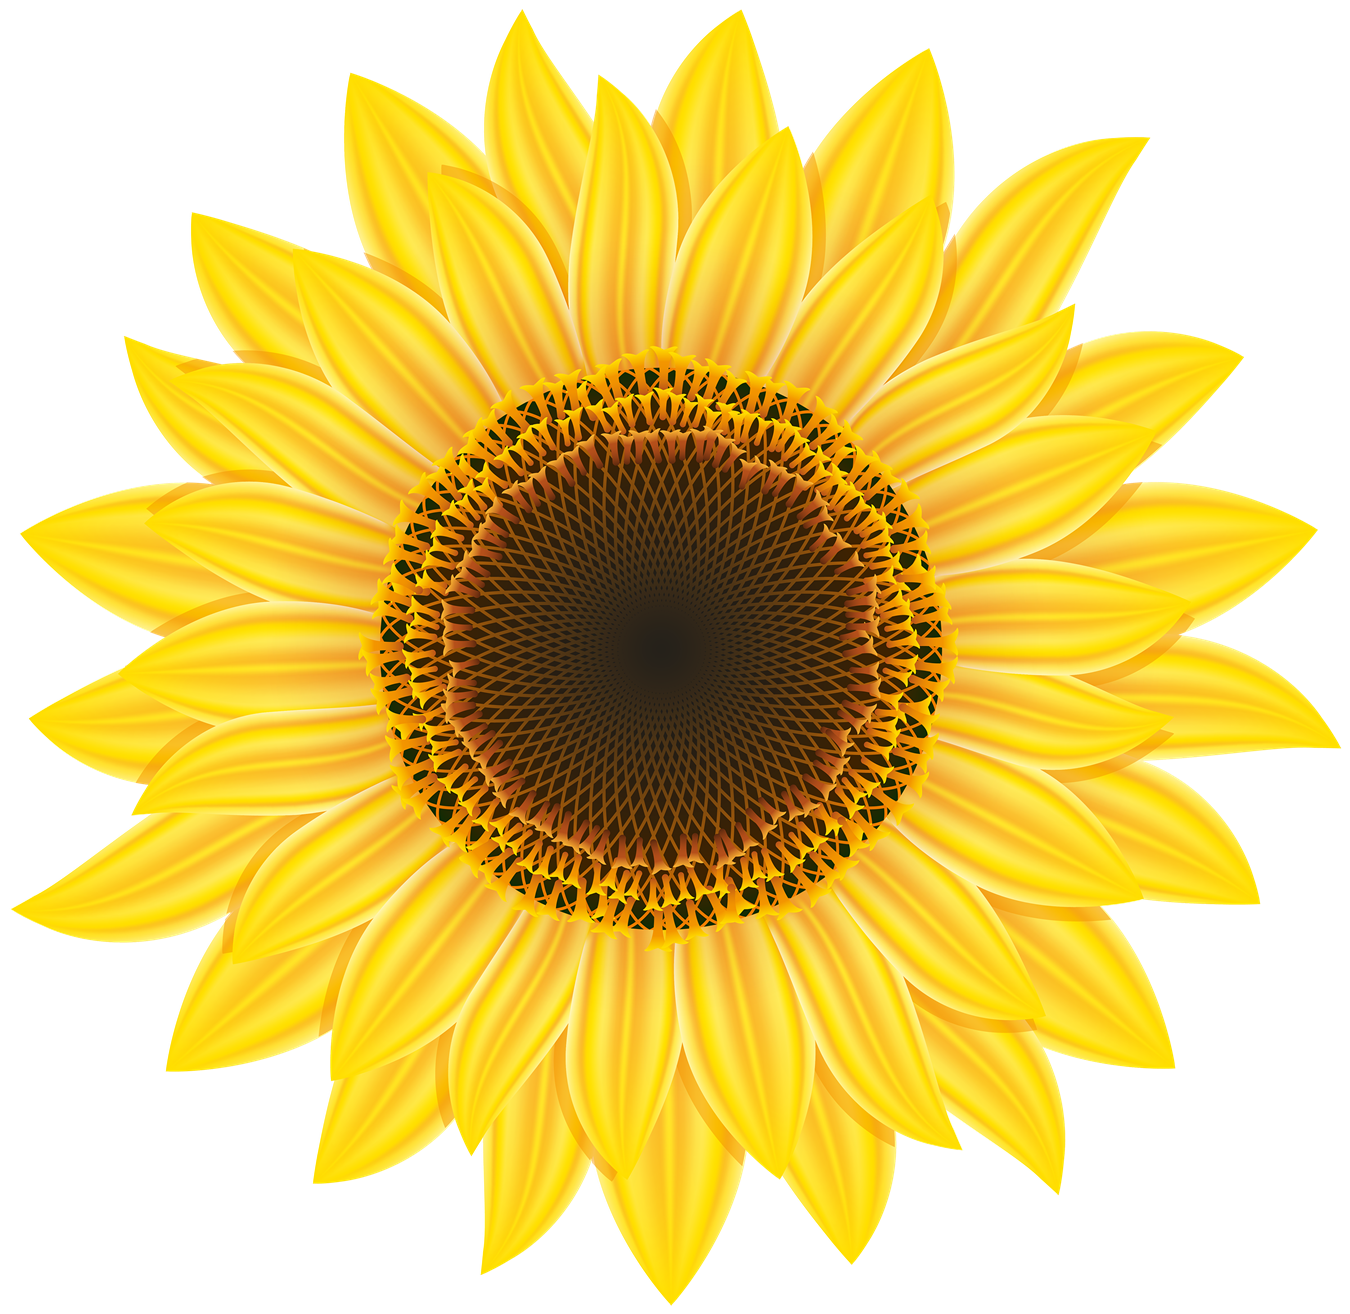 Sunflower Png Image - Sunflower, Transparent background PNG HD thumbnail